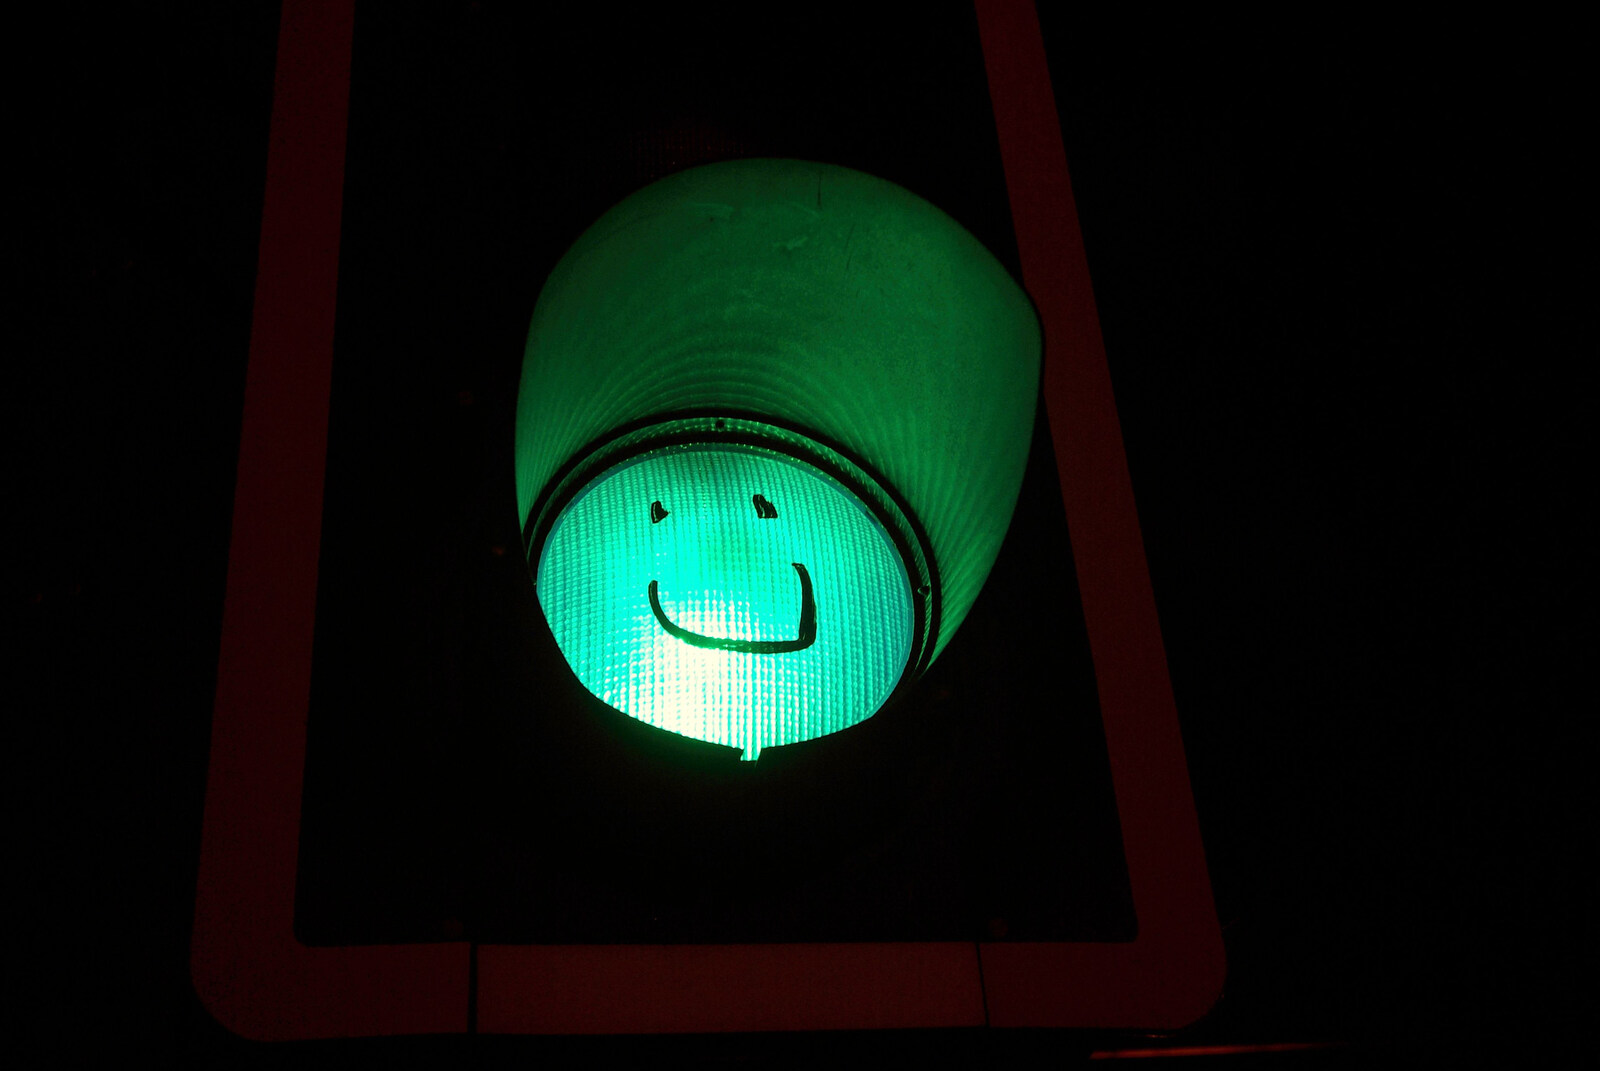 Paul's 30th in the Swan Inn, and a Night in the Salisbury Arms, Brome and Cambridge - 3rd March 2007: A smiley green traffic light